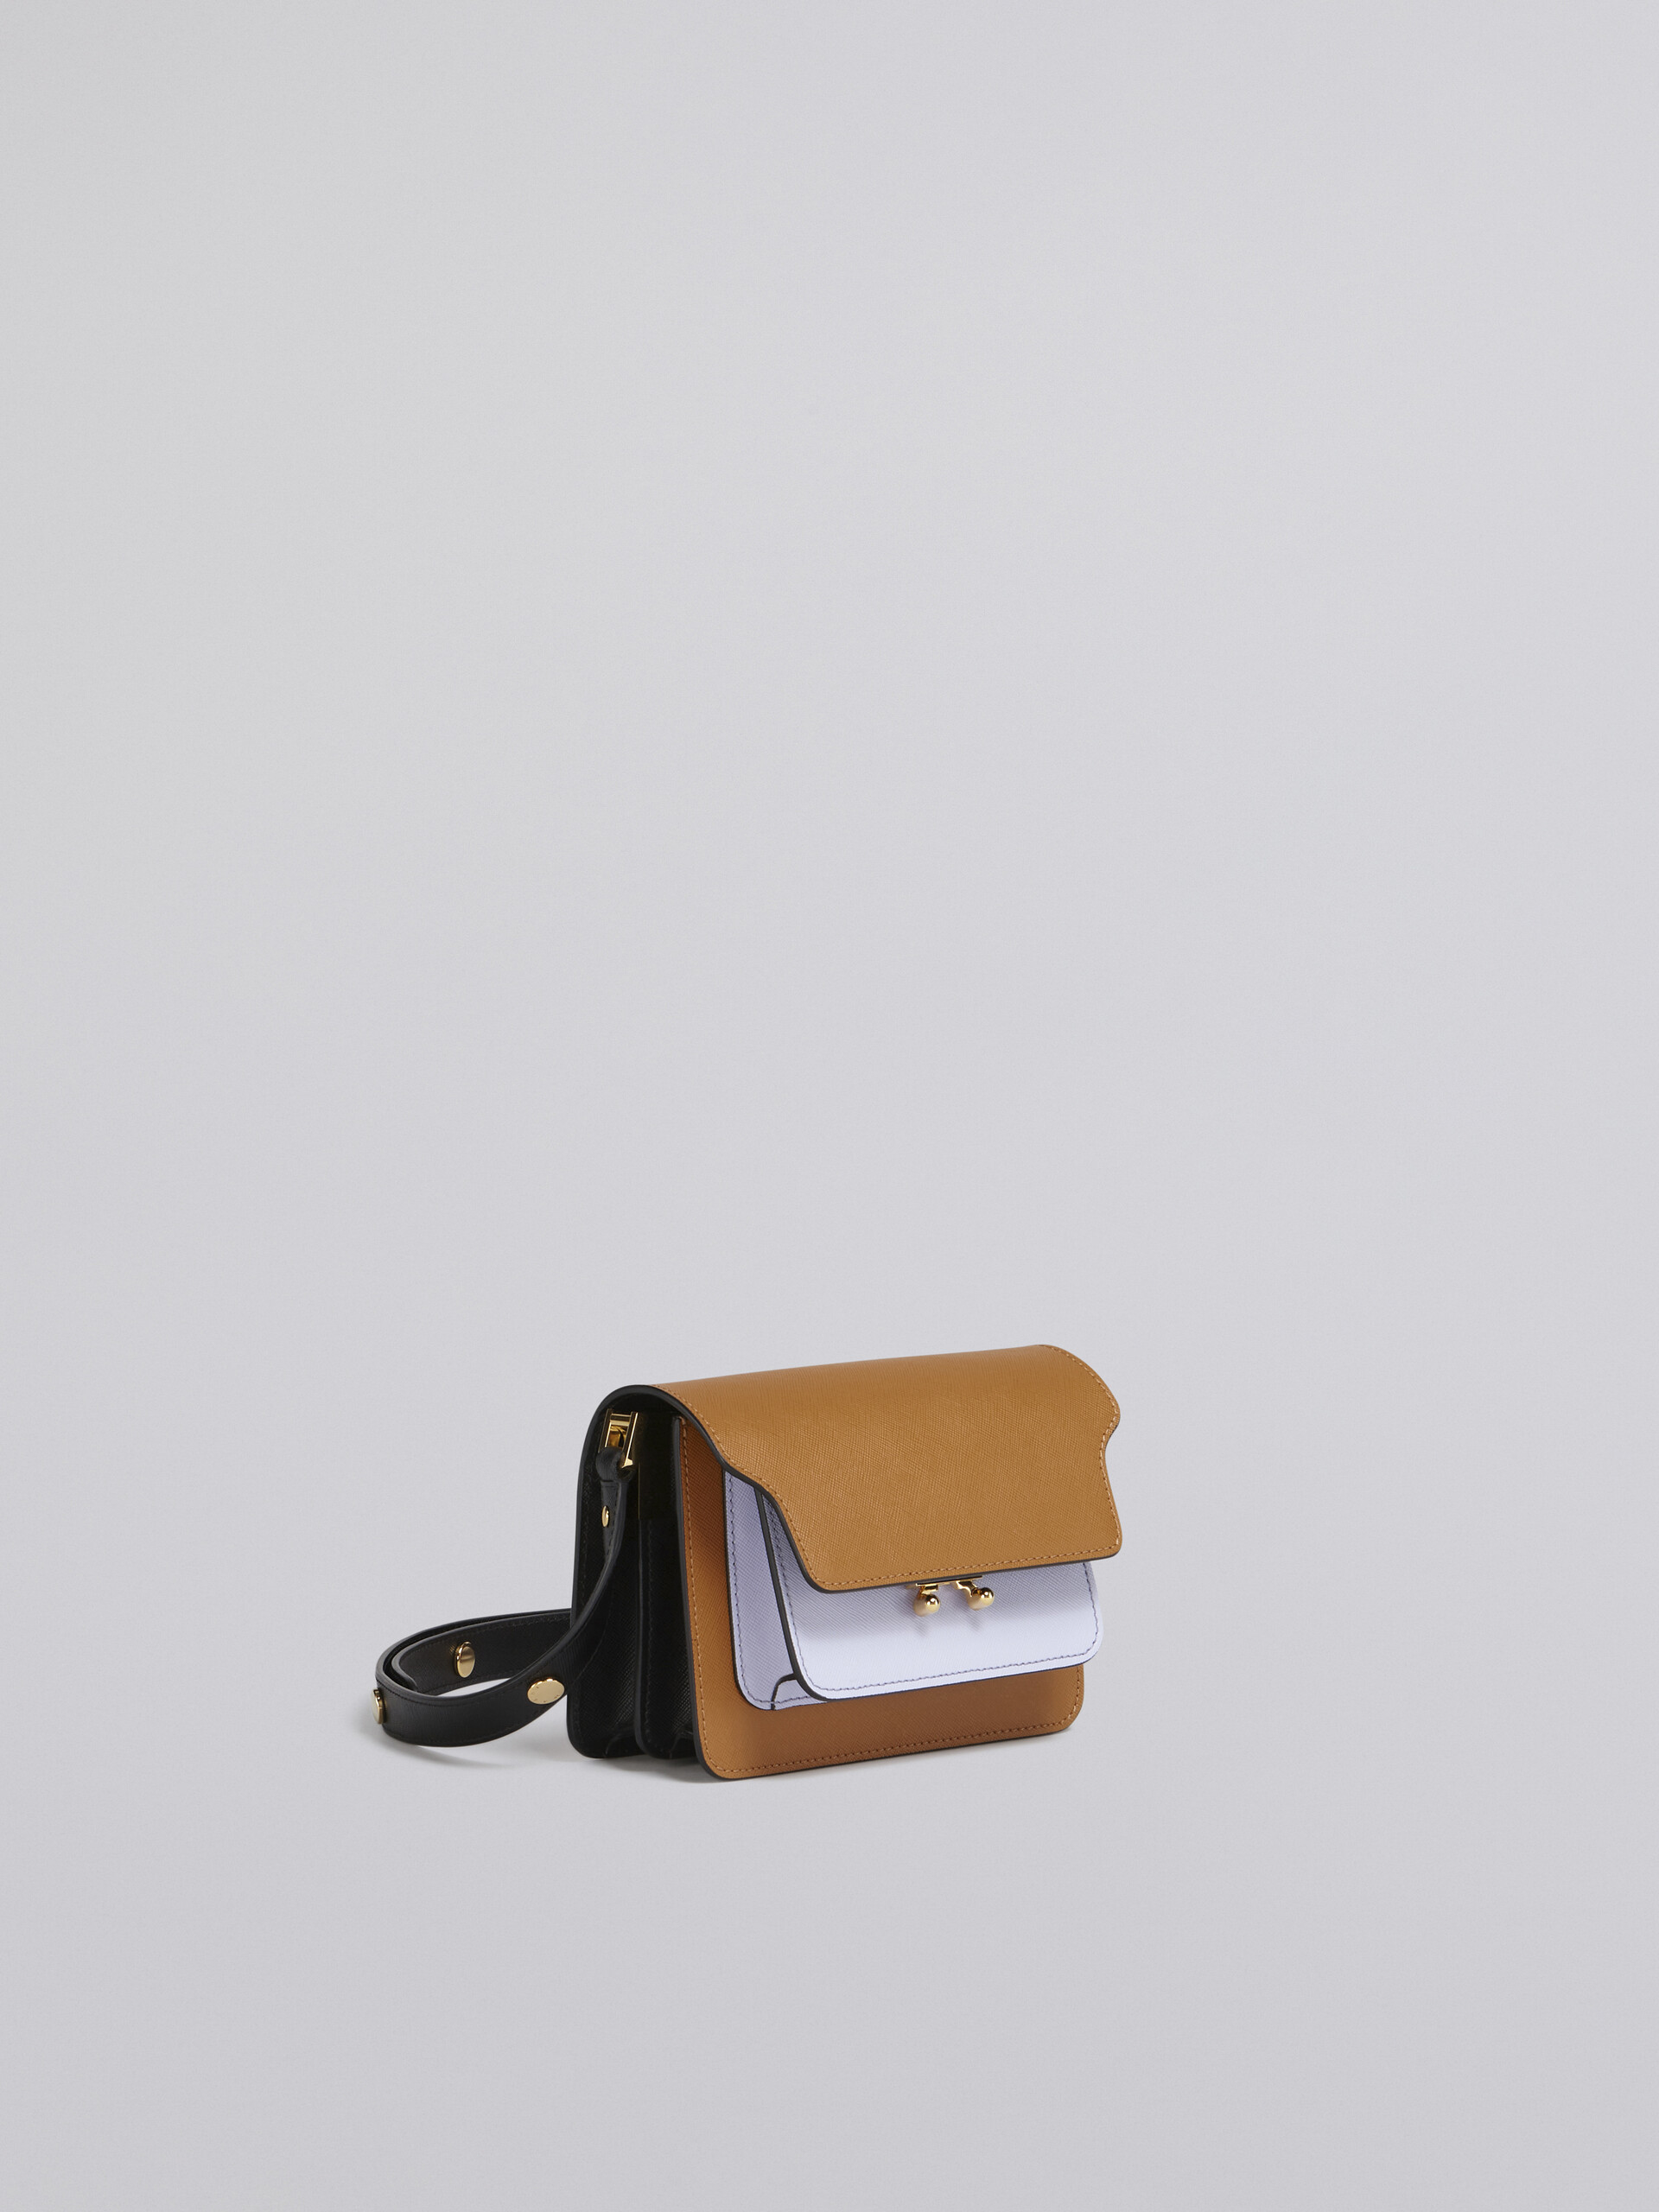 TRUNK mini bag in brown lilac and black saffiano leather - Shoulder Bags - Image 6